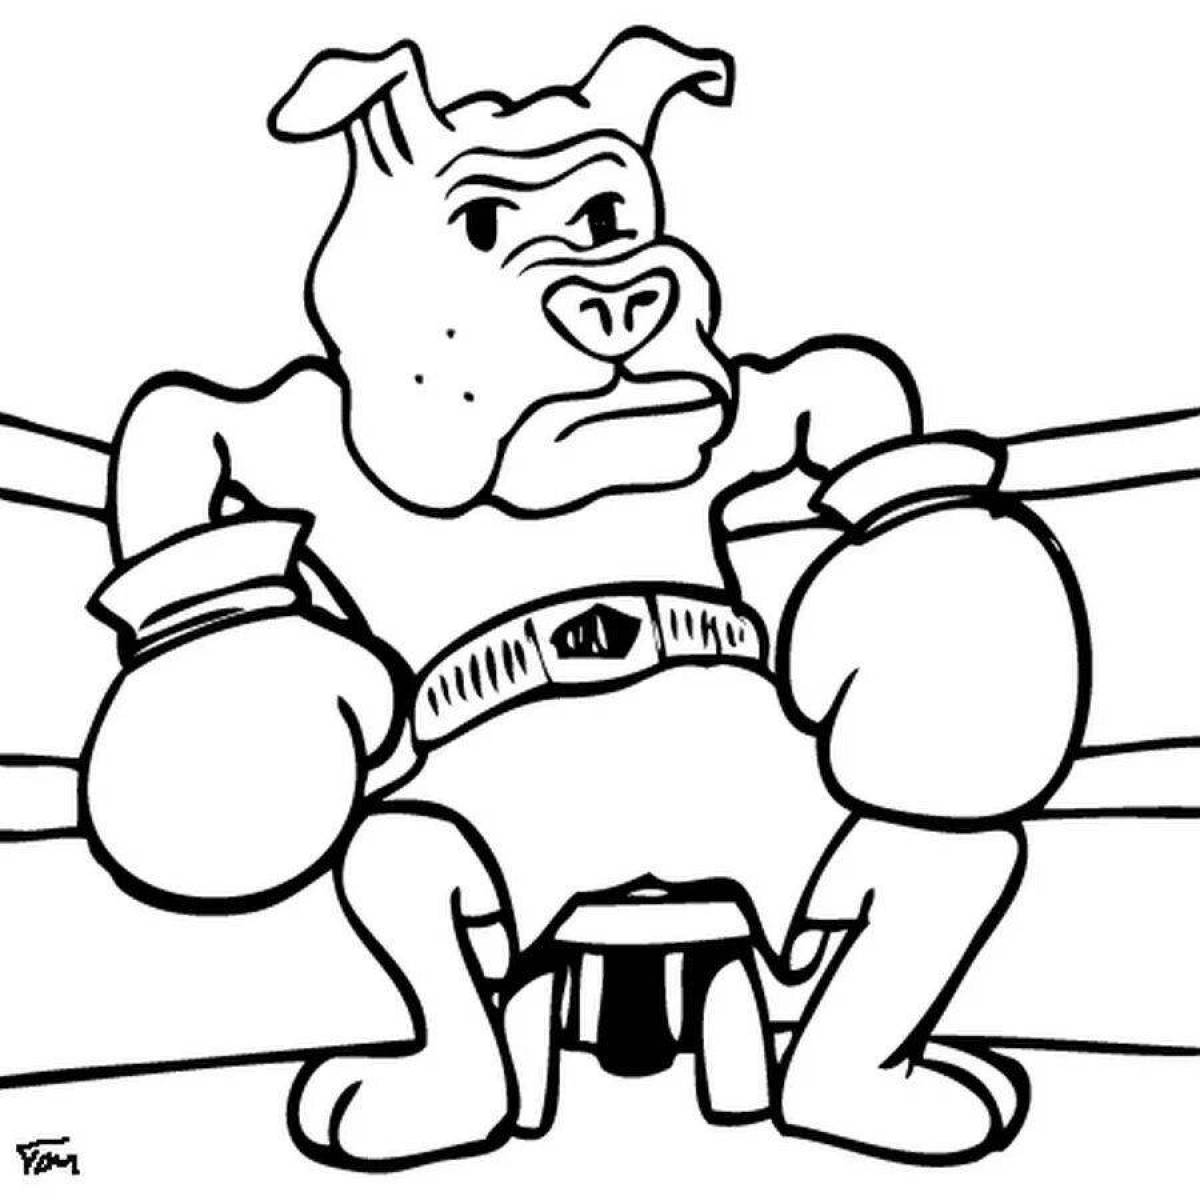 Coloring page dazzling boxer